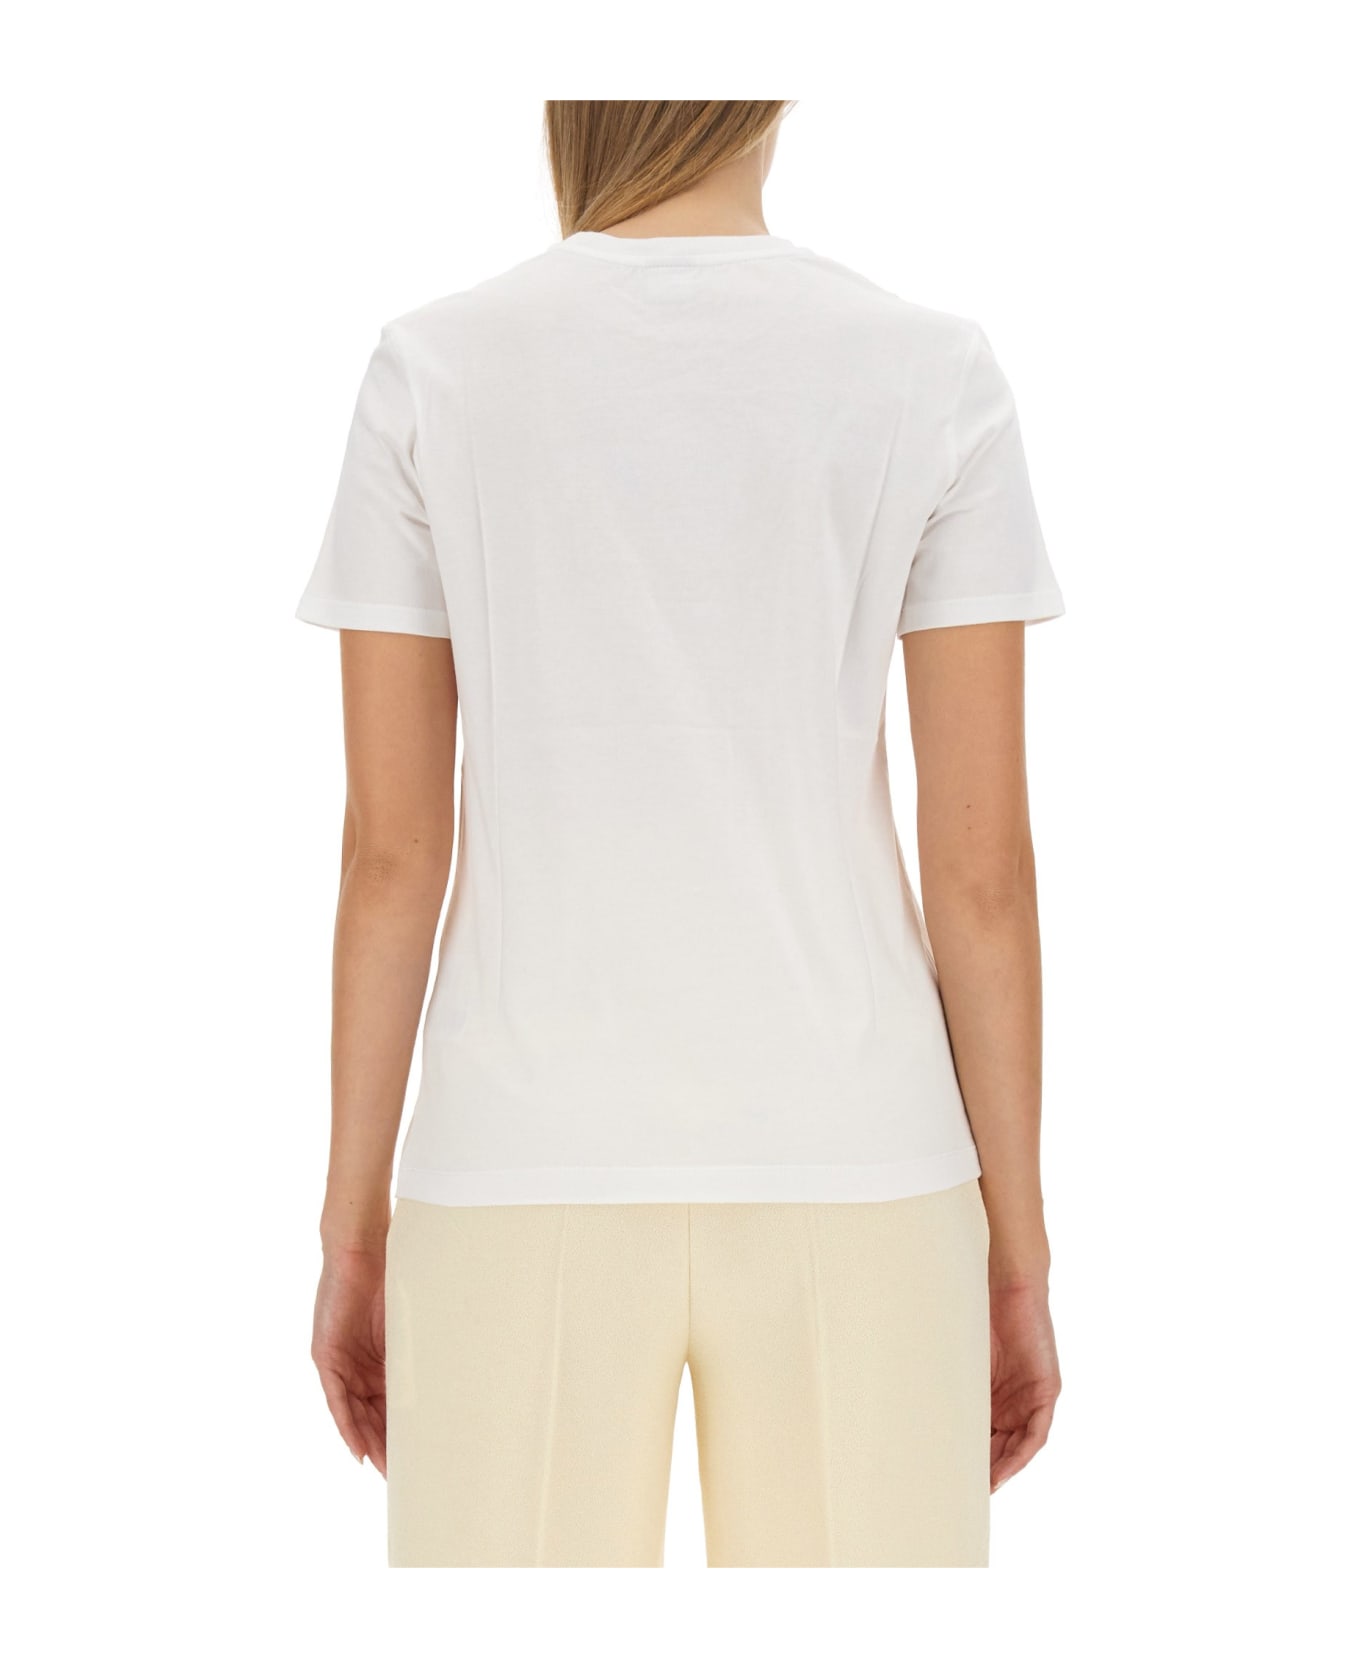 PS by Paul Smith T-shirt With Print - BIANCO